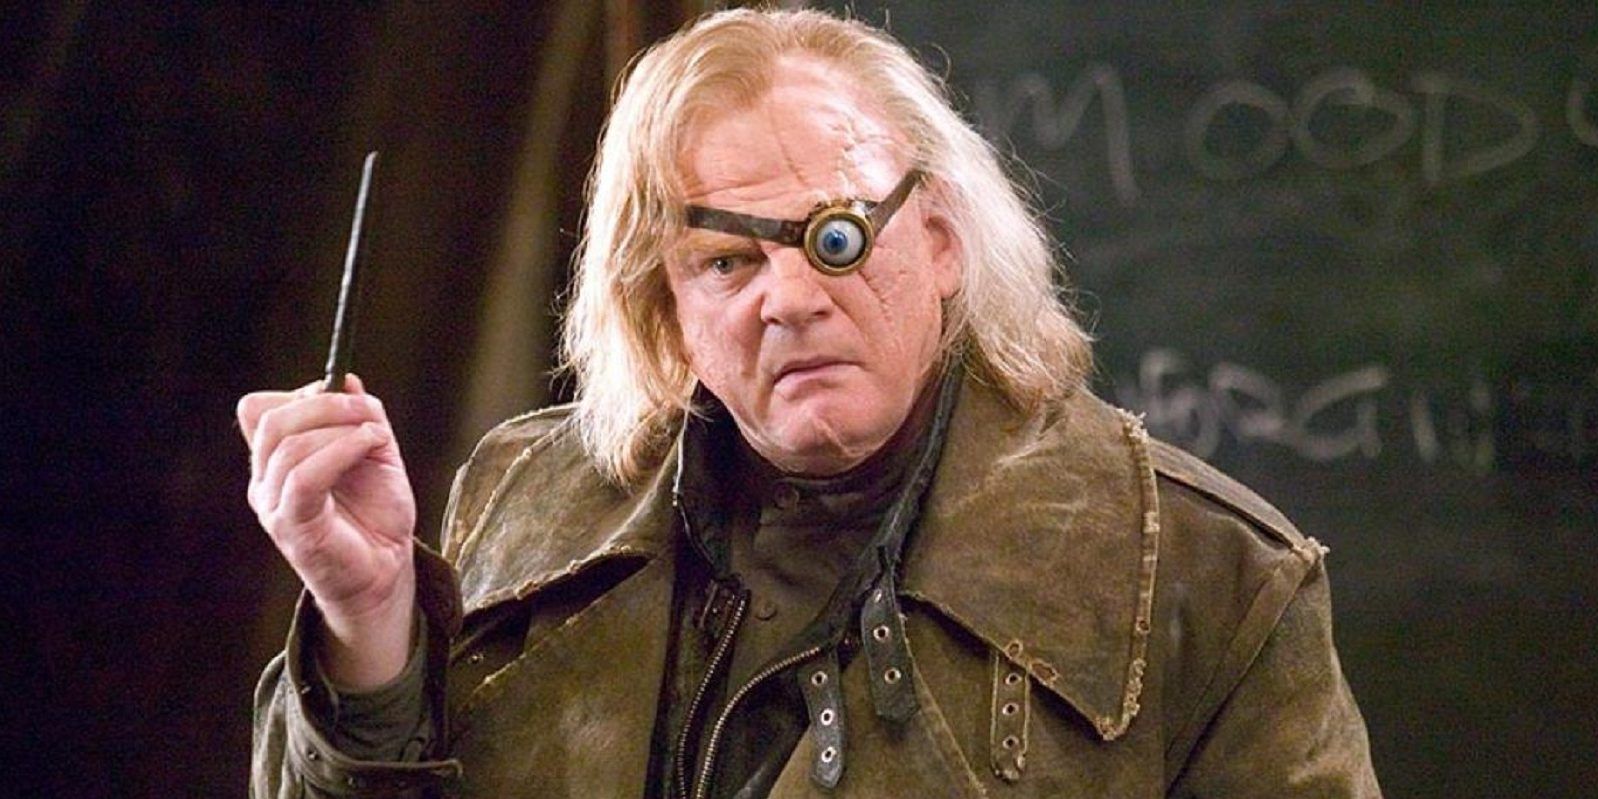 Mad-Eye Moody holding a wand.